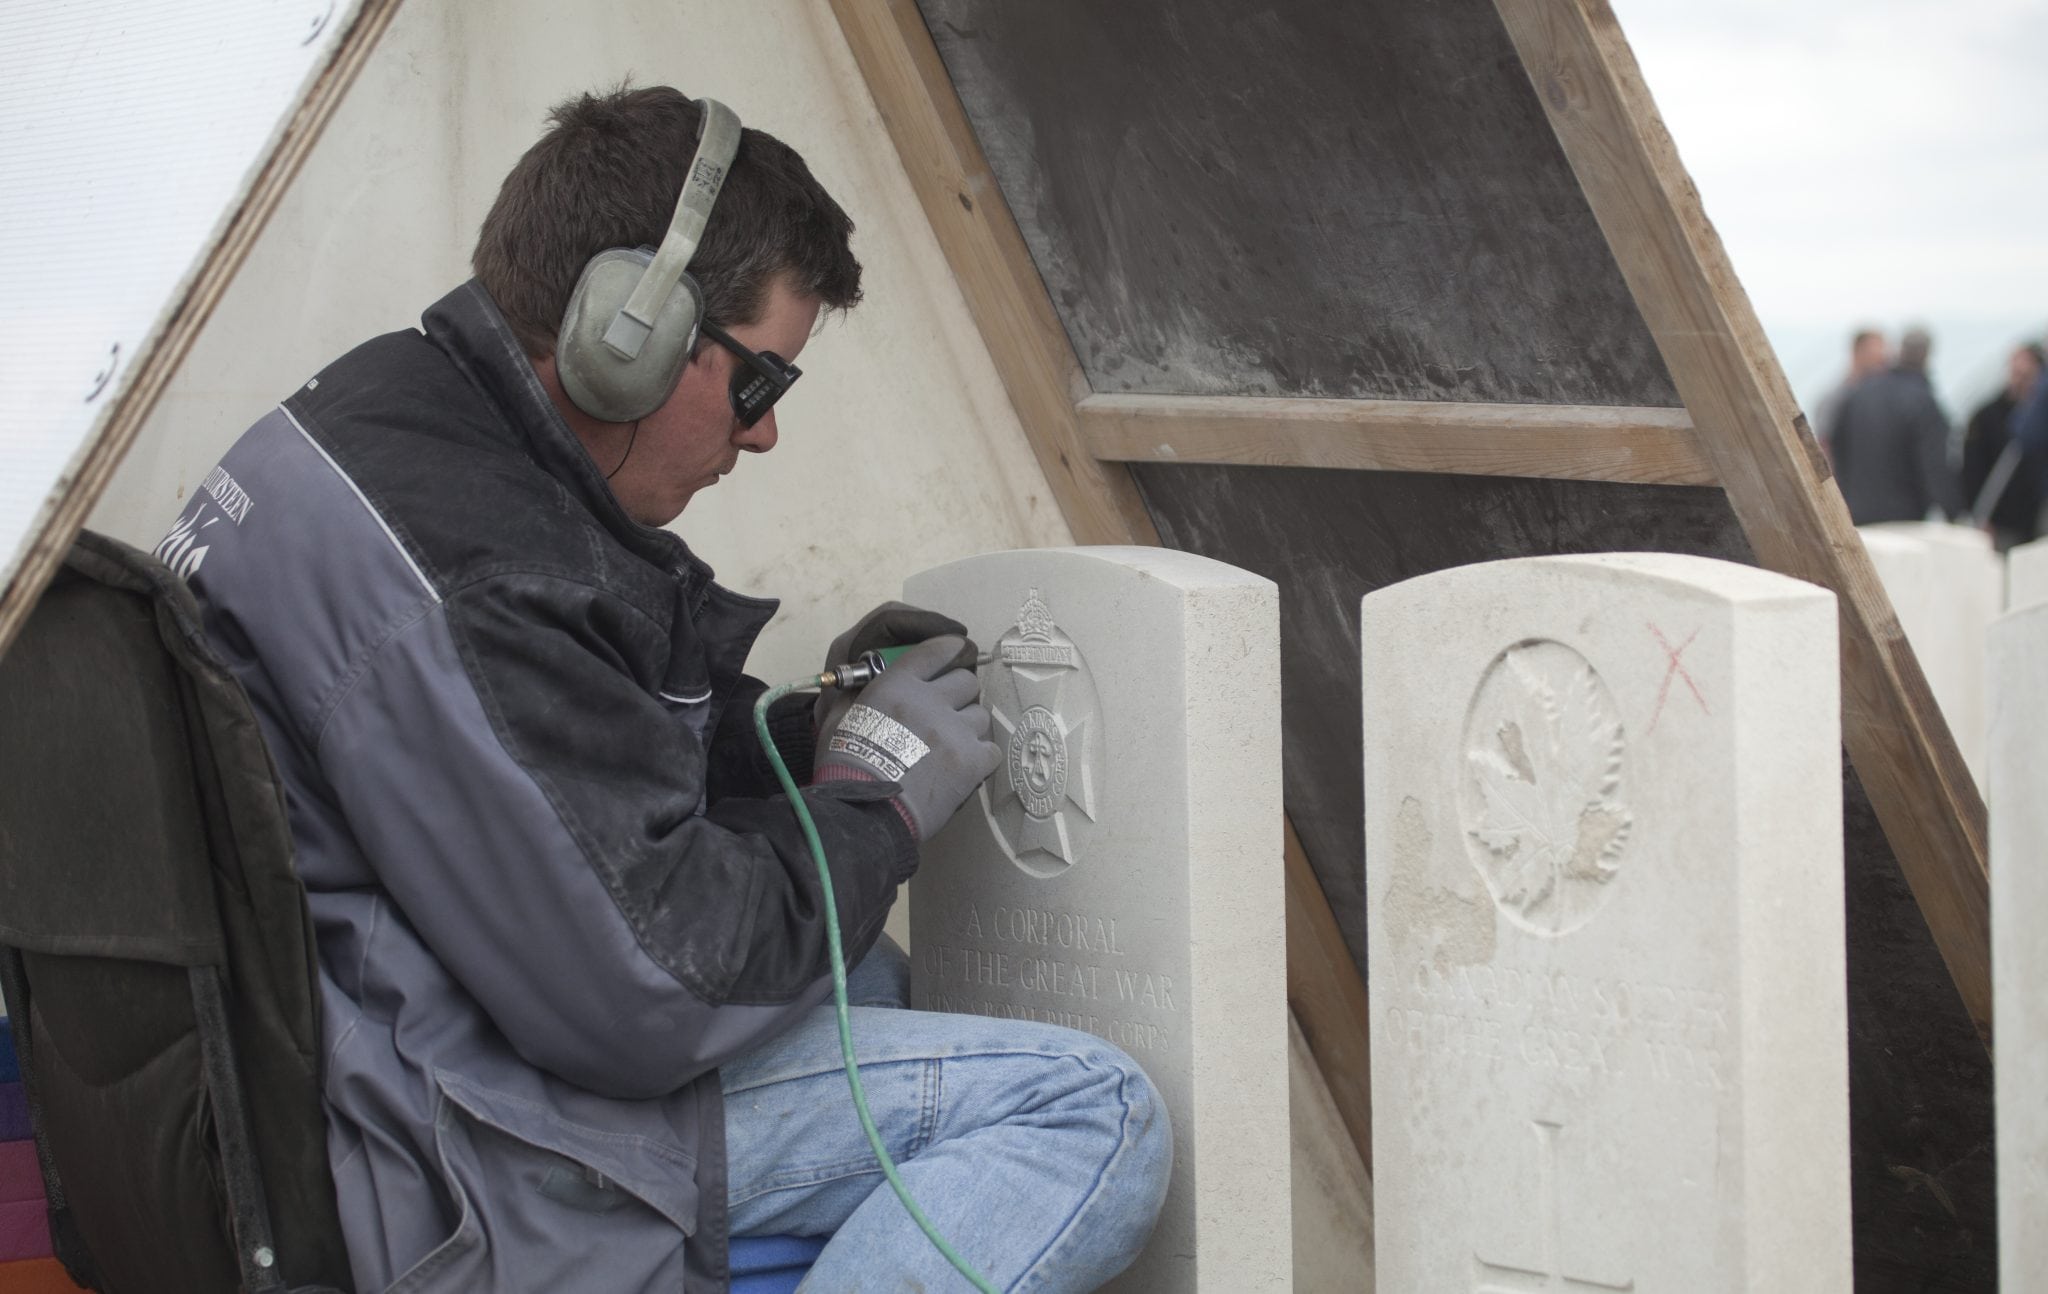 An engraver works under a rain tent as he re-engraves the headstone of a WWI soldier at Tyne Cot cemetery in Zonnebeke, Belgium on Monday, April 15, 2013. 